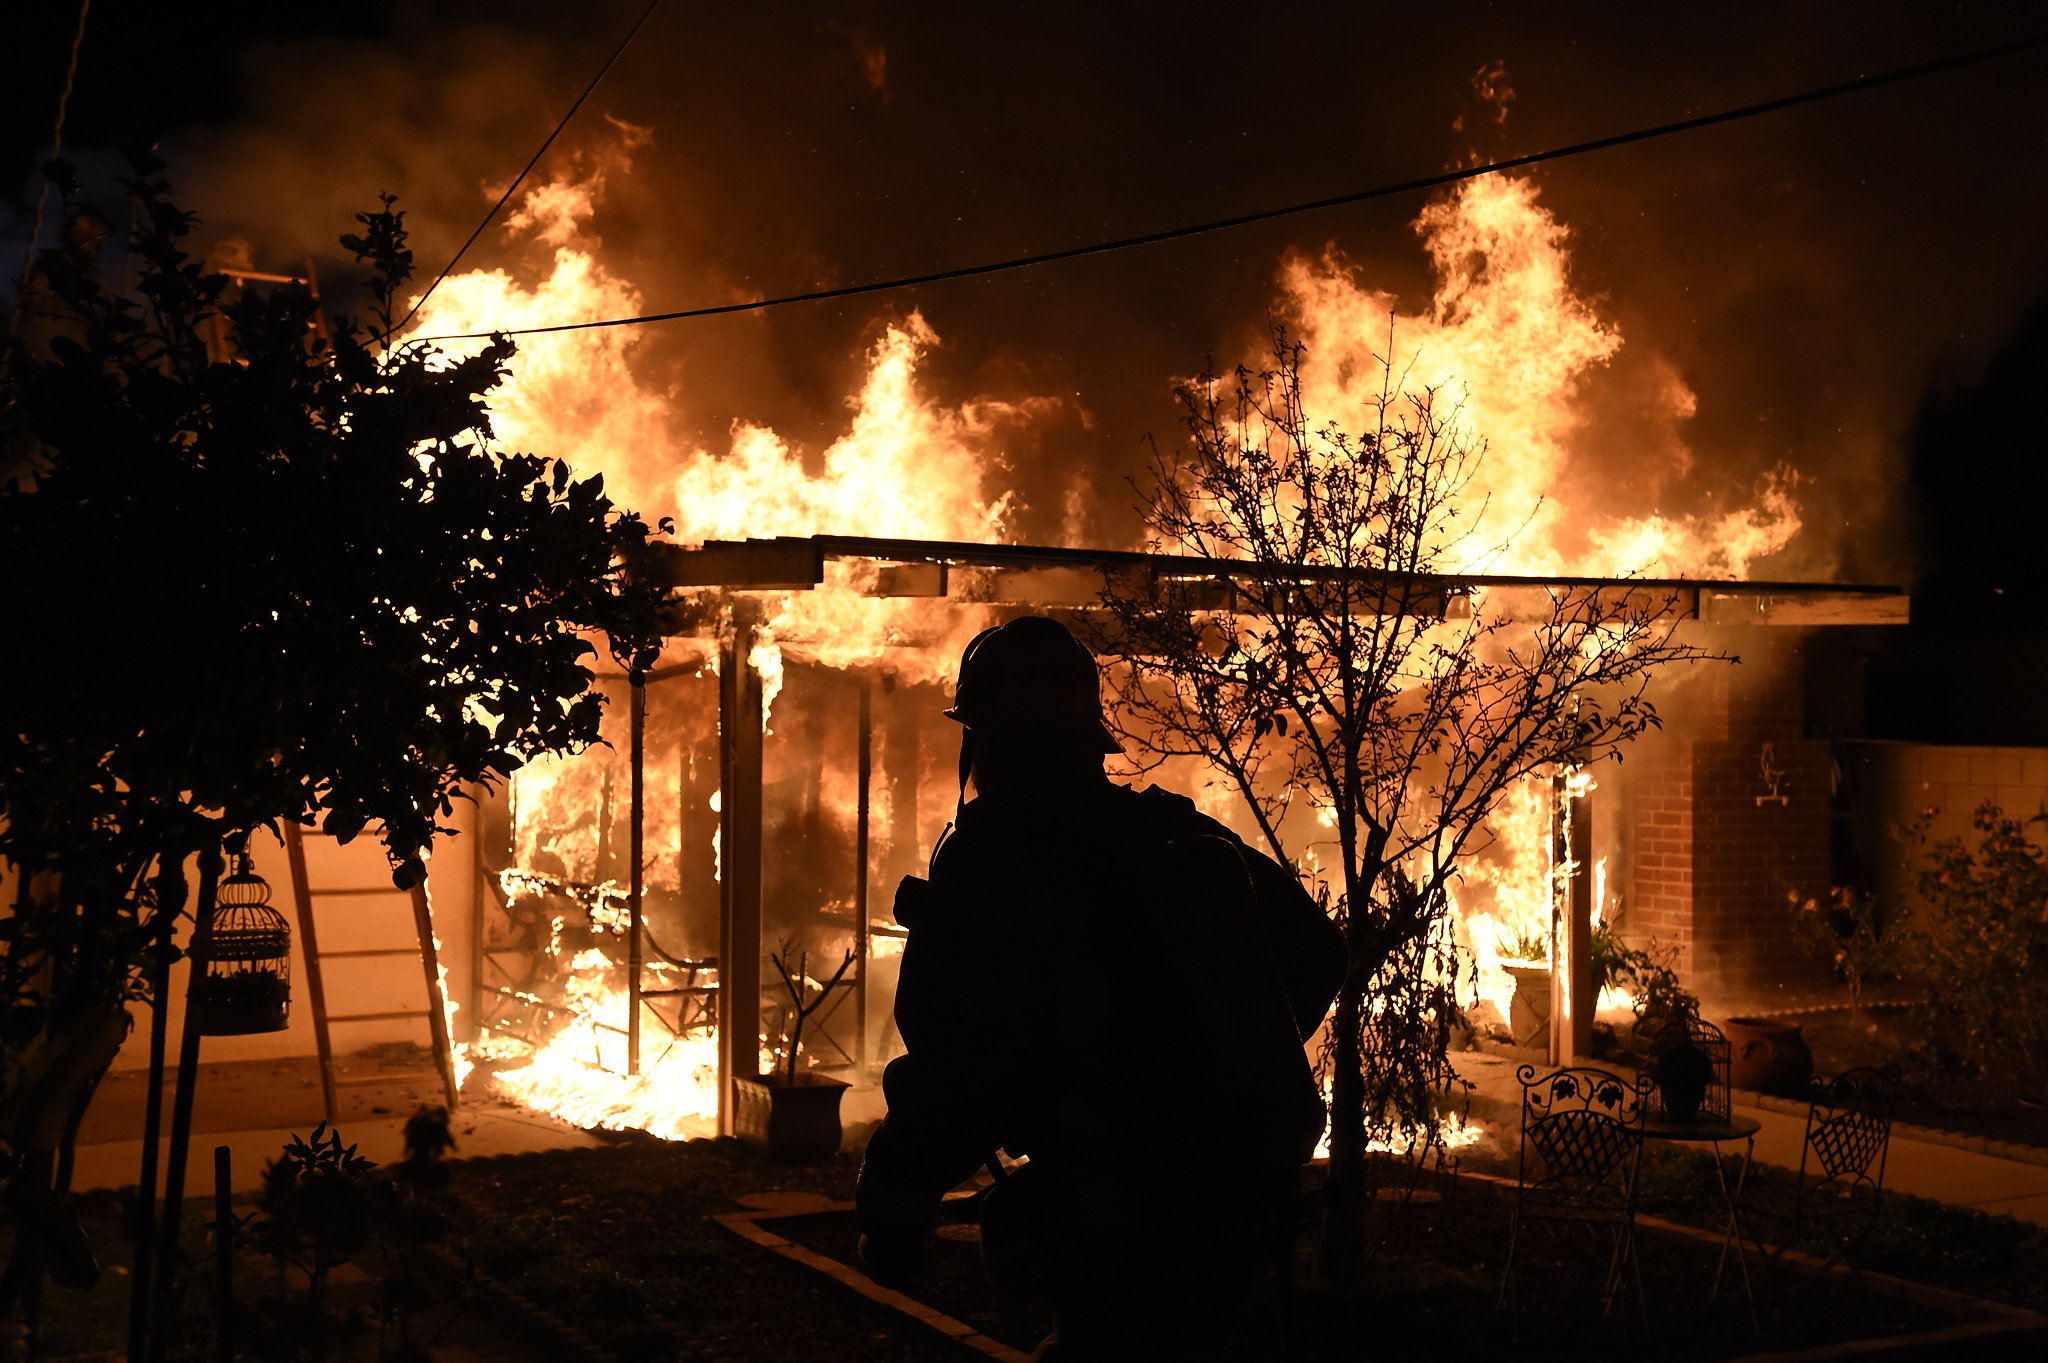 Burning house with a Firefighter in the foreground.  